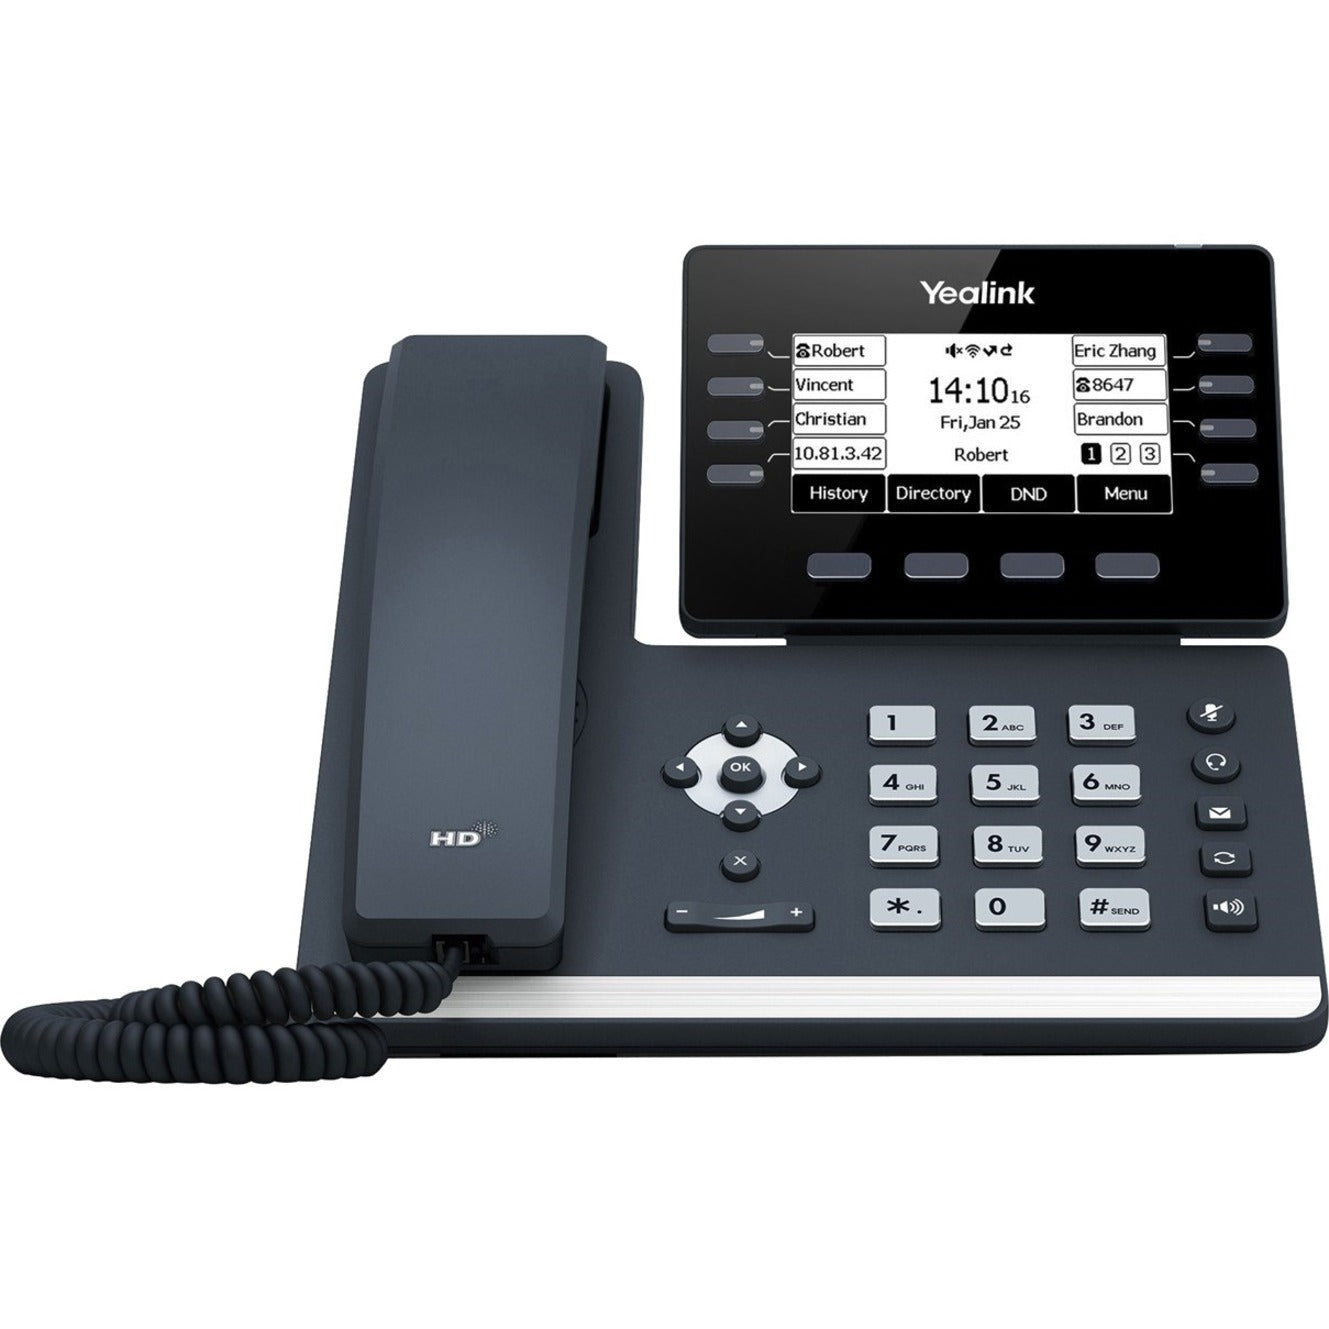 Yealink SIP-T53W Prime Business Phone with 3.7" Graphical LCD Screen, Built-In Bluetooth 4.2